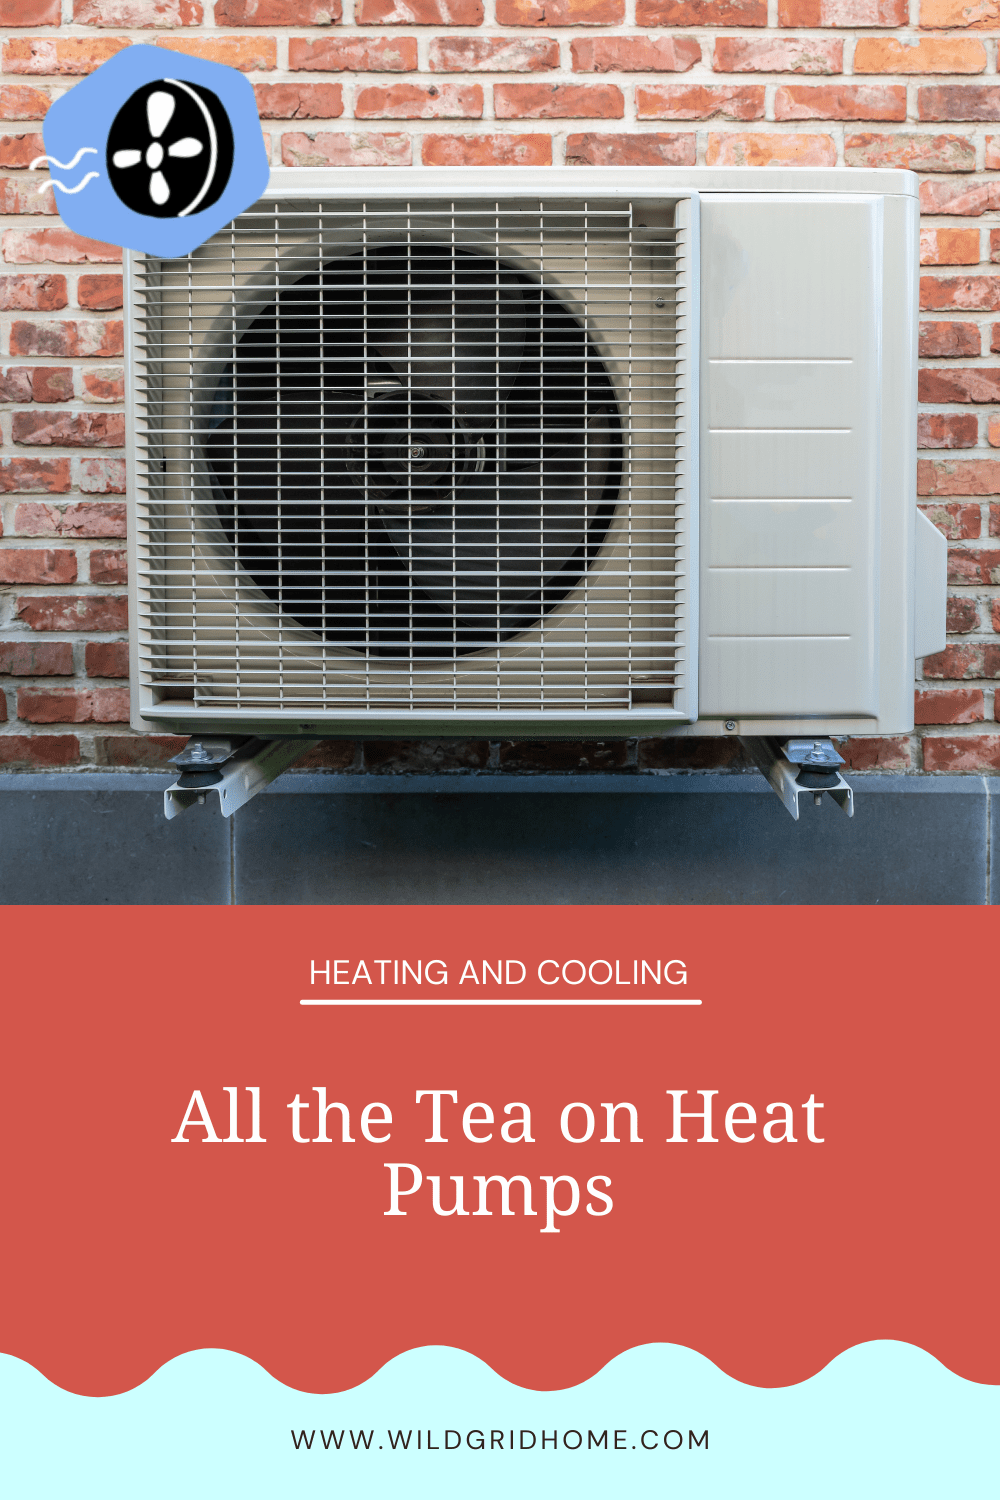 All the tea on heat pumps - Wildgrid Home